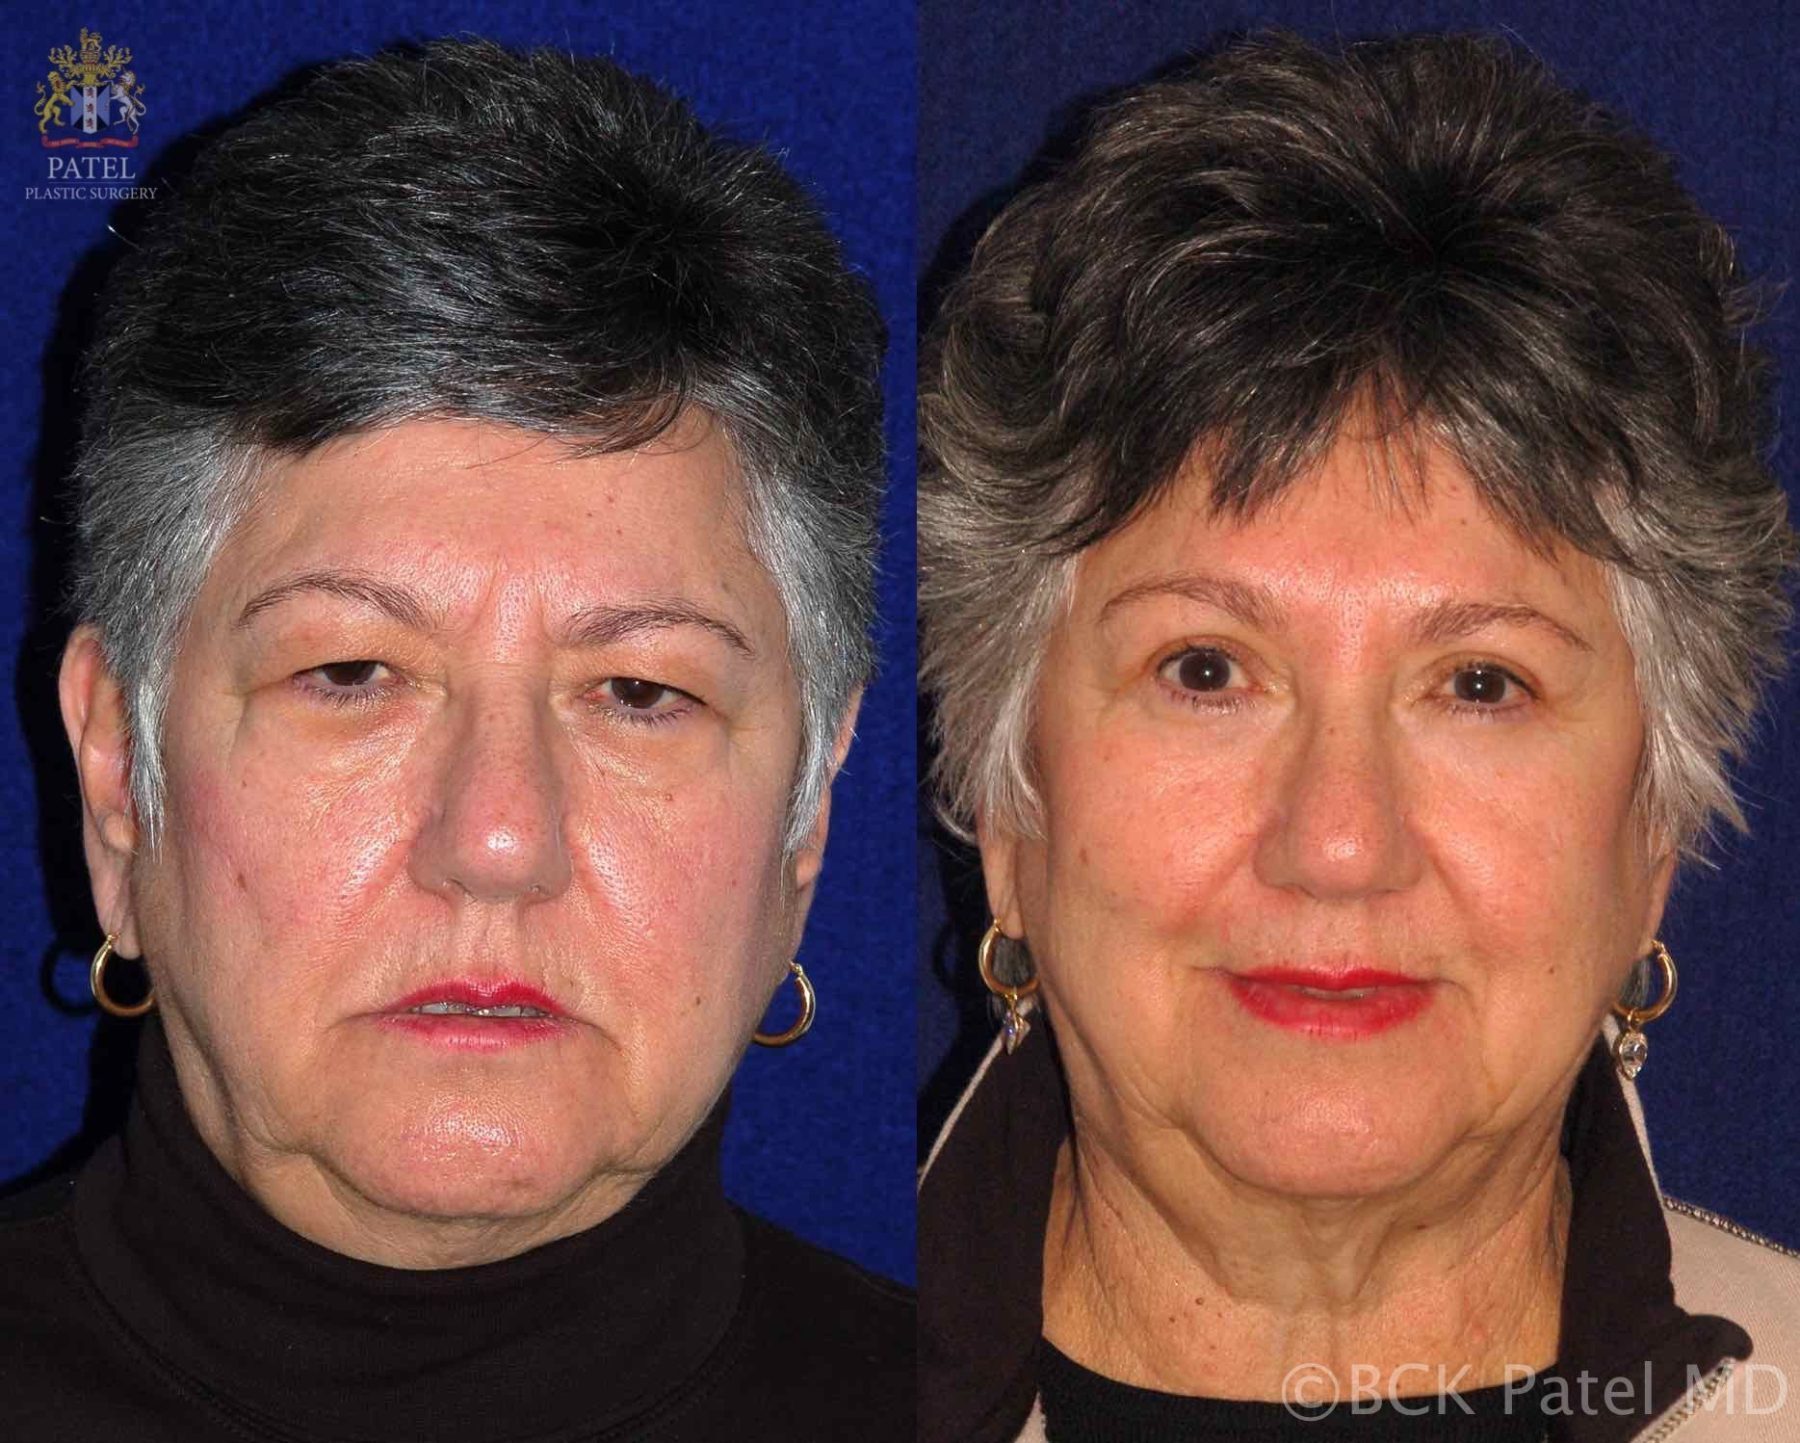 englishsurgeon.com. Photos showing results of endoscopic brow lifts